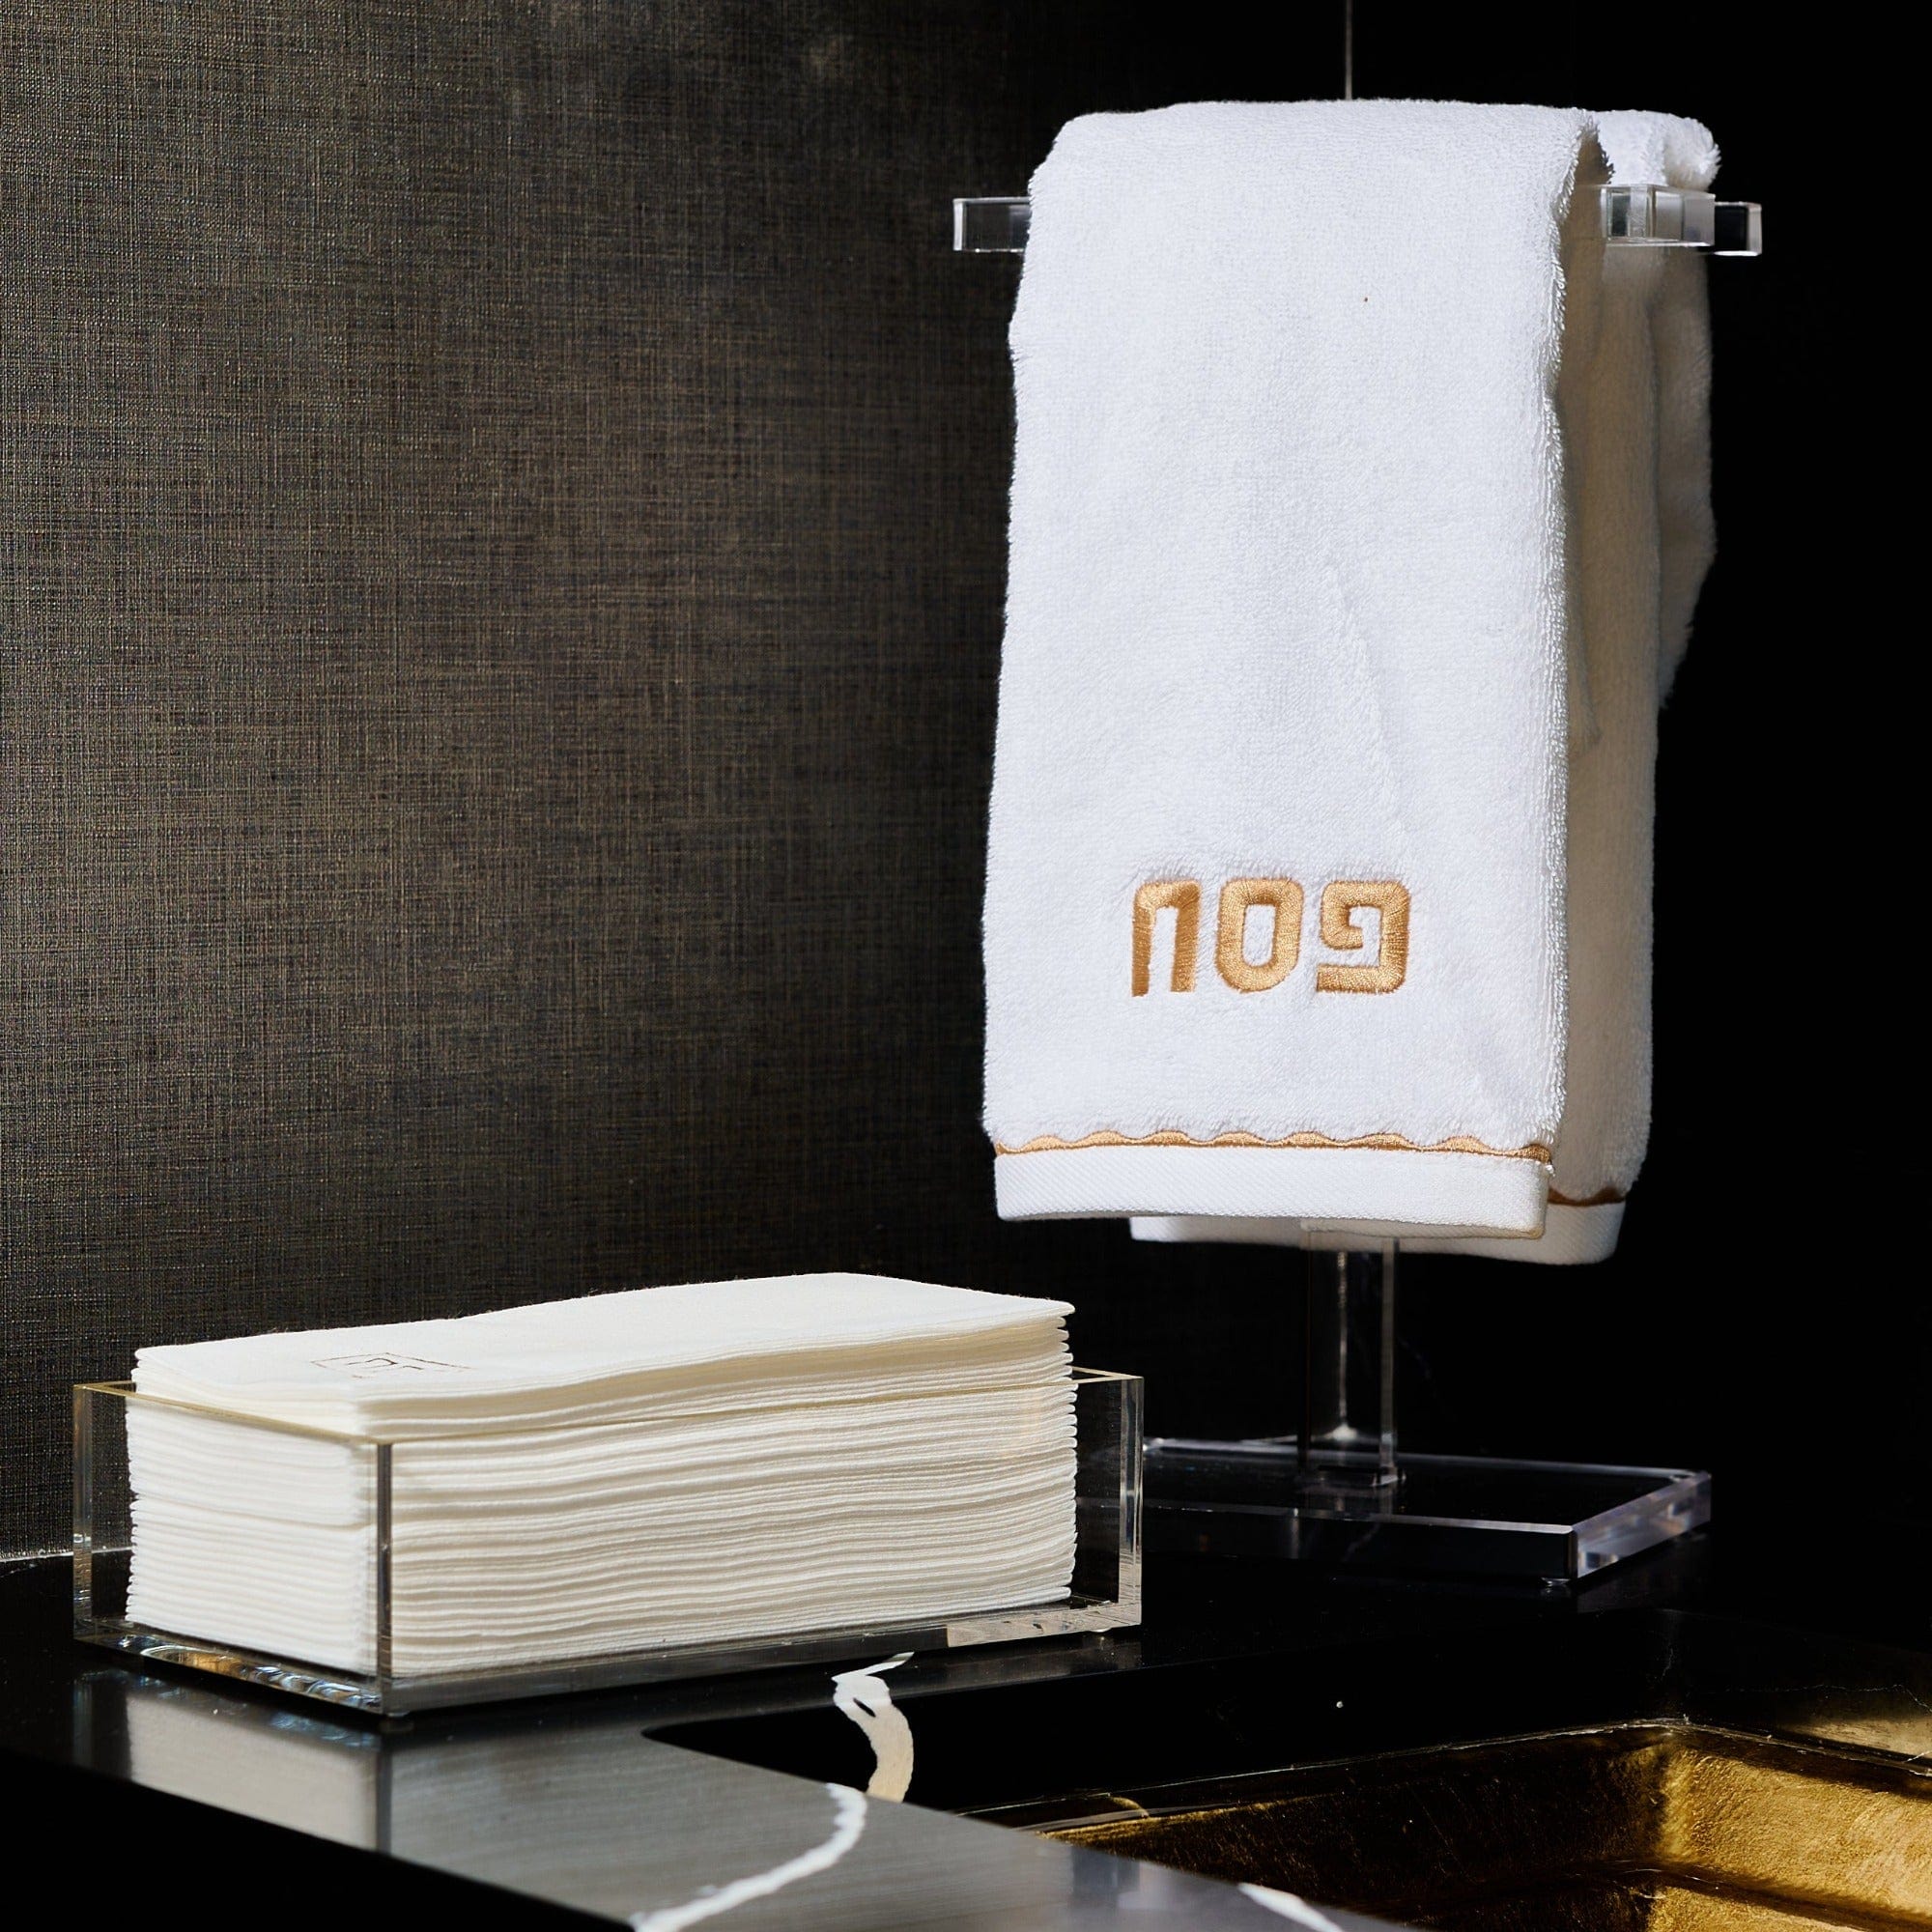 Pesach Scalloped Hand Towel